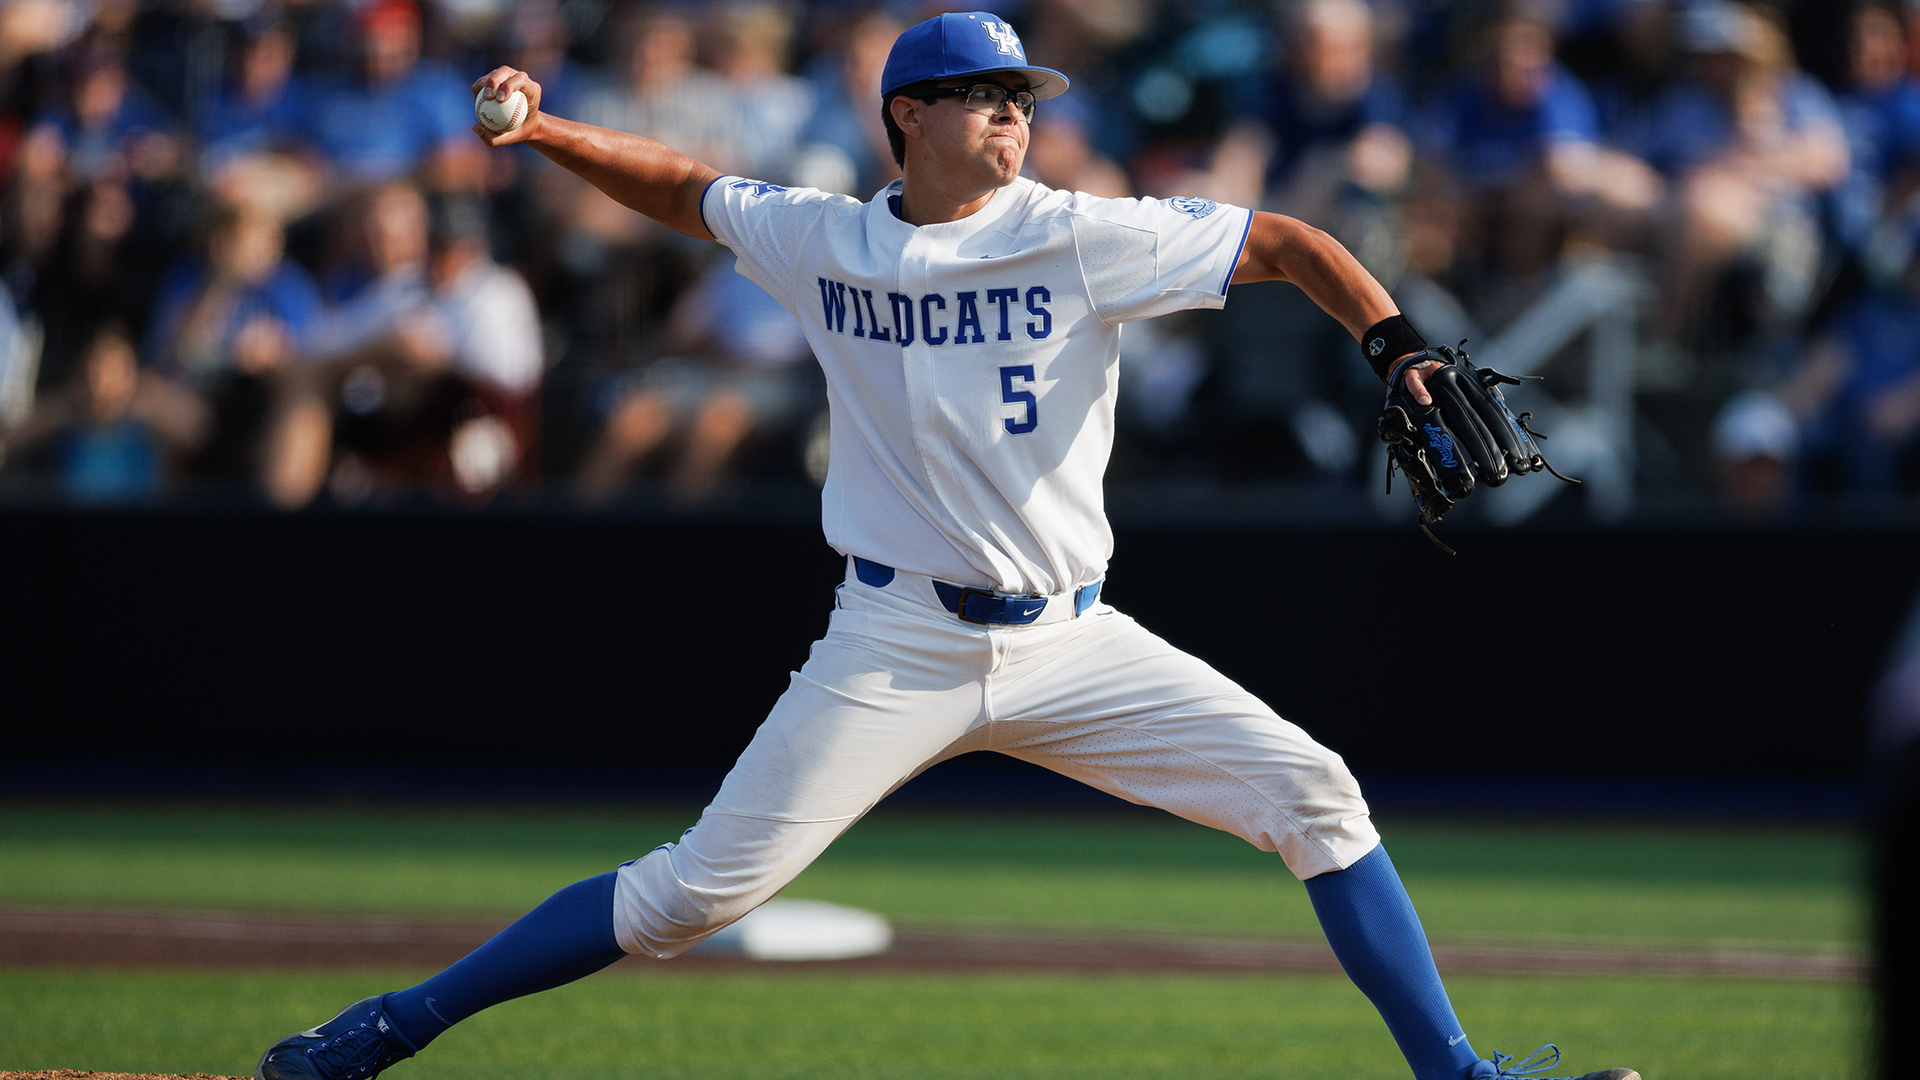 Native Kentuckians Pitch Cats Past Hoosiers on Monday